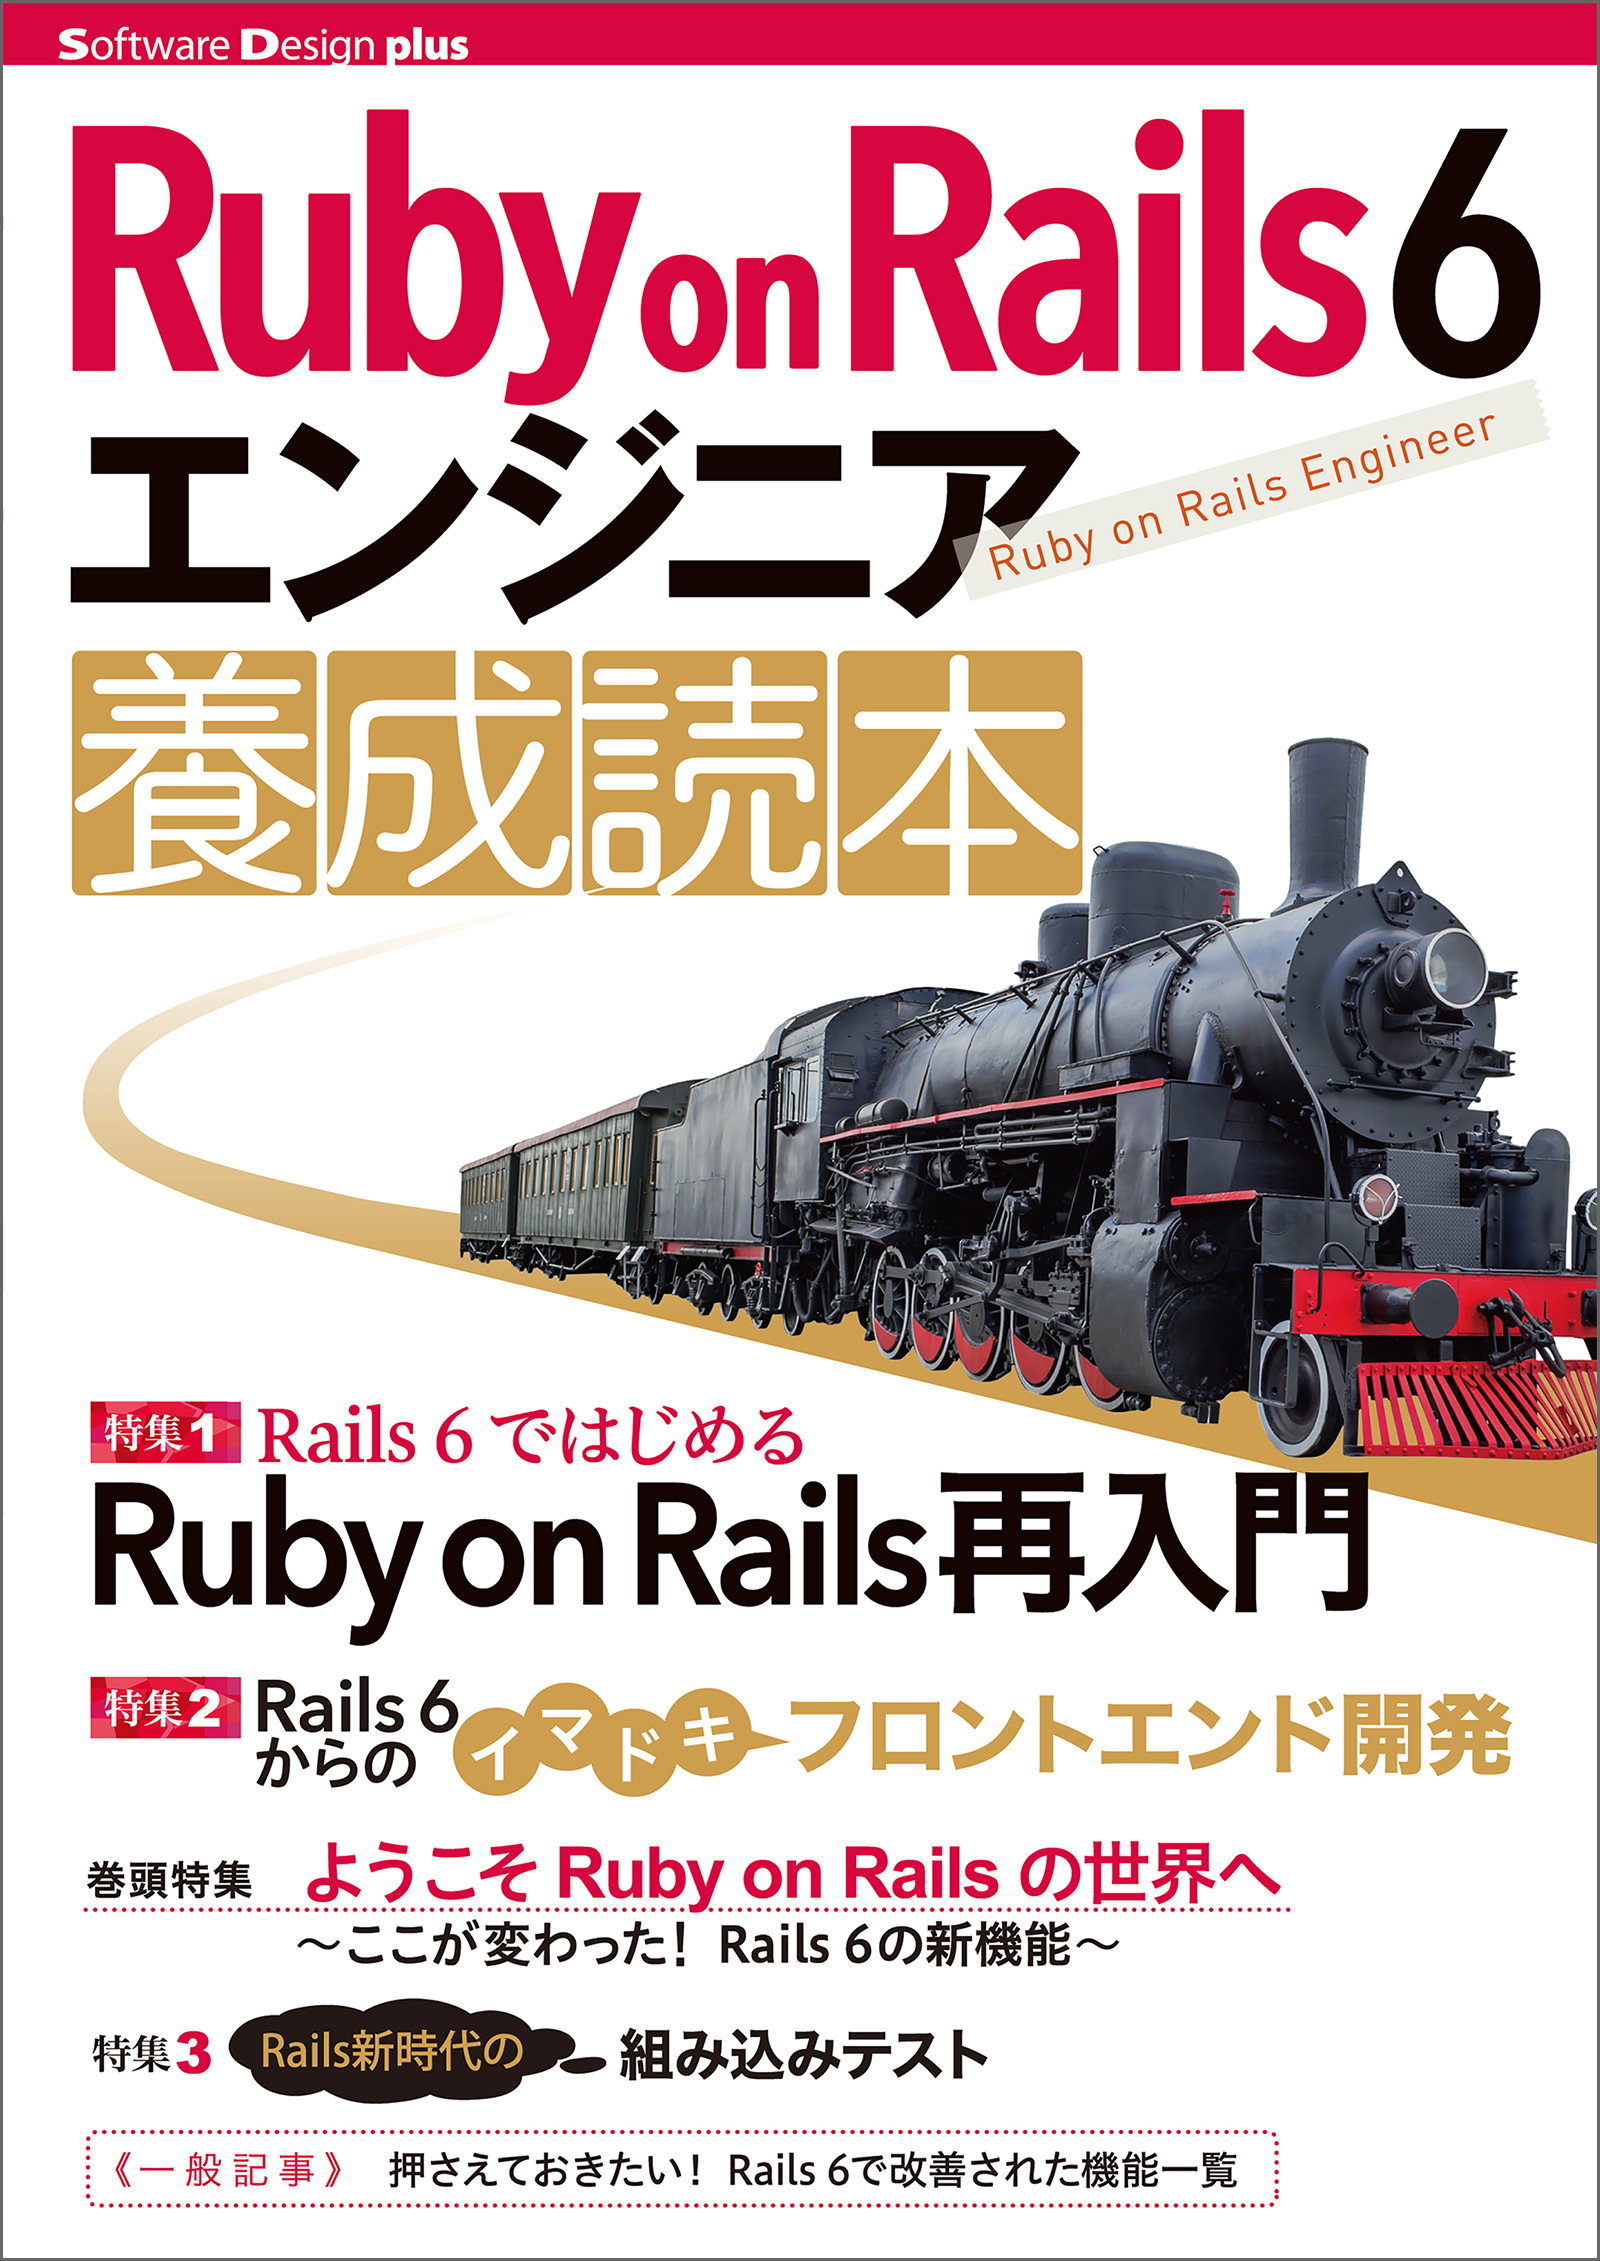 Ruby on Rails 6 実践ガイド - コンピュータ・IT